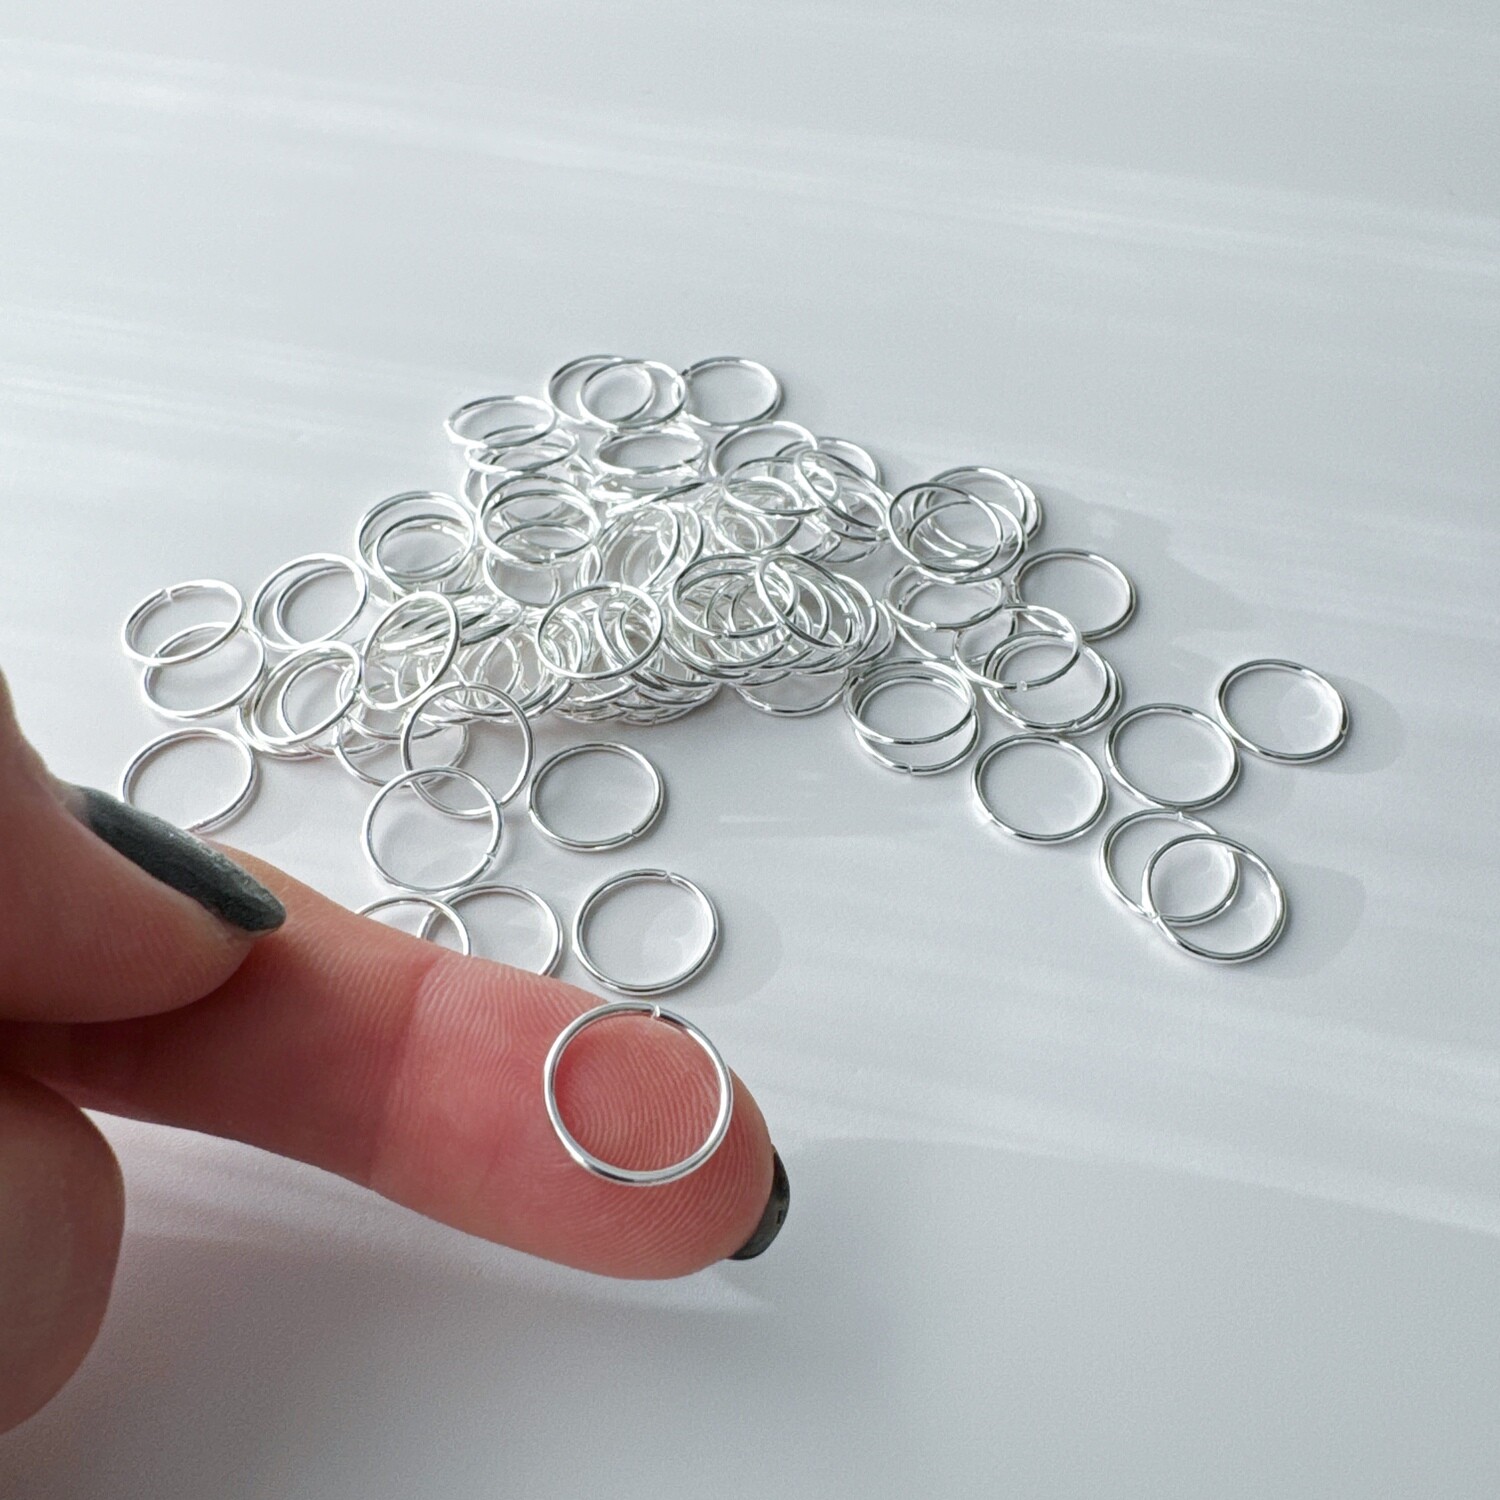 100 Jump Rings, 12mm, Silver-Plated Brass